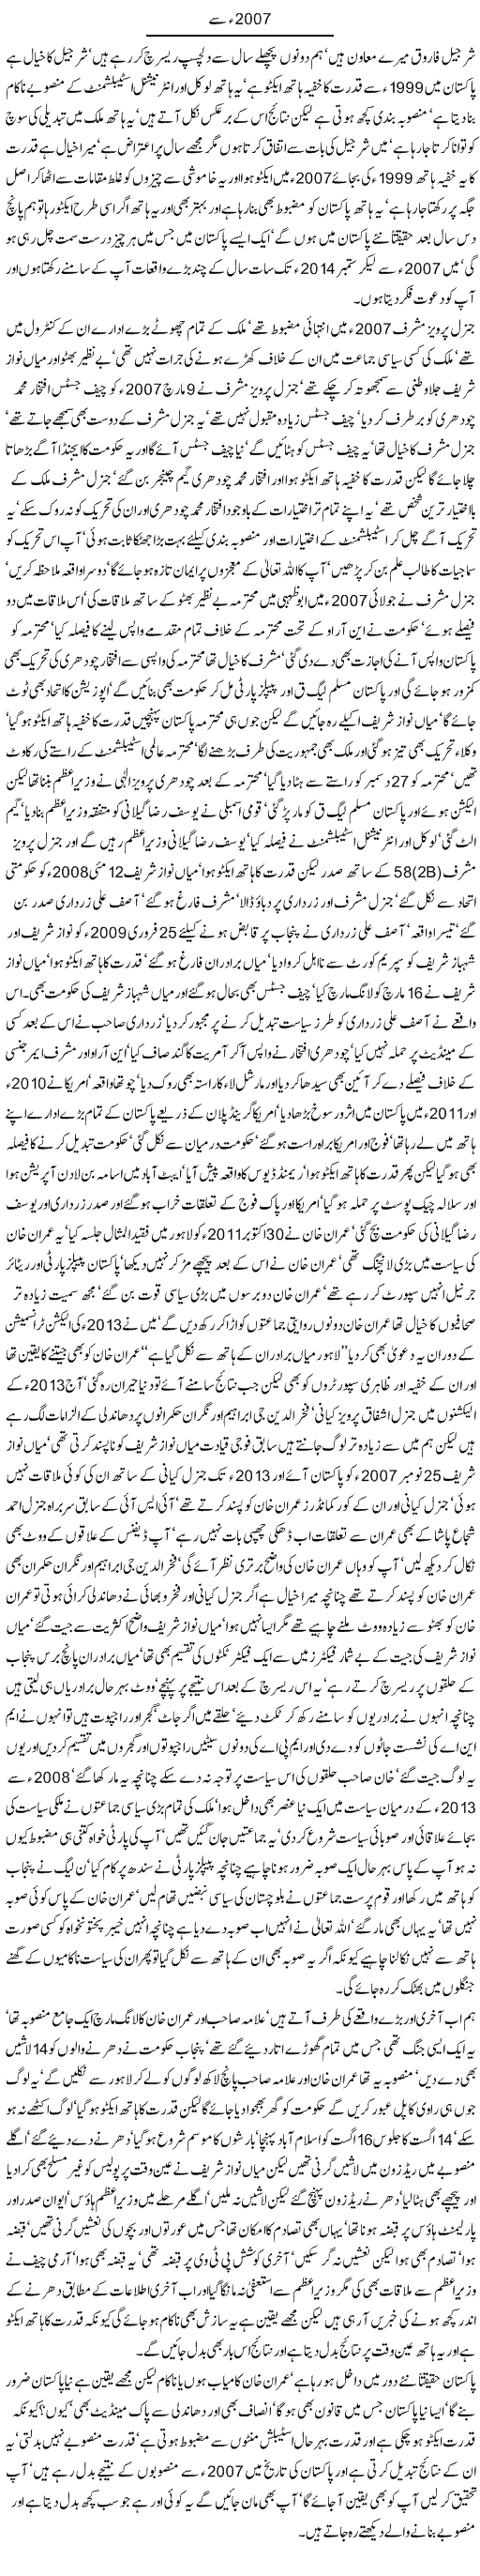 2007 say By Javed Chaudhry